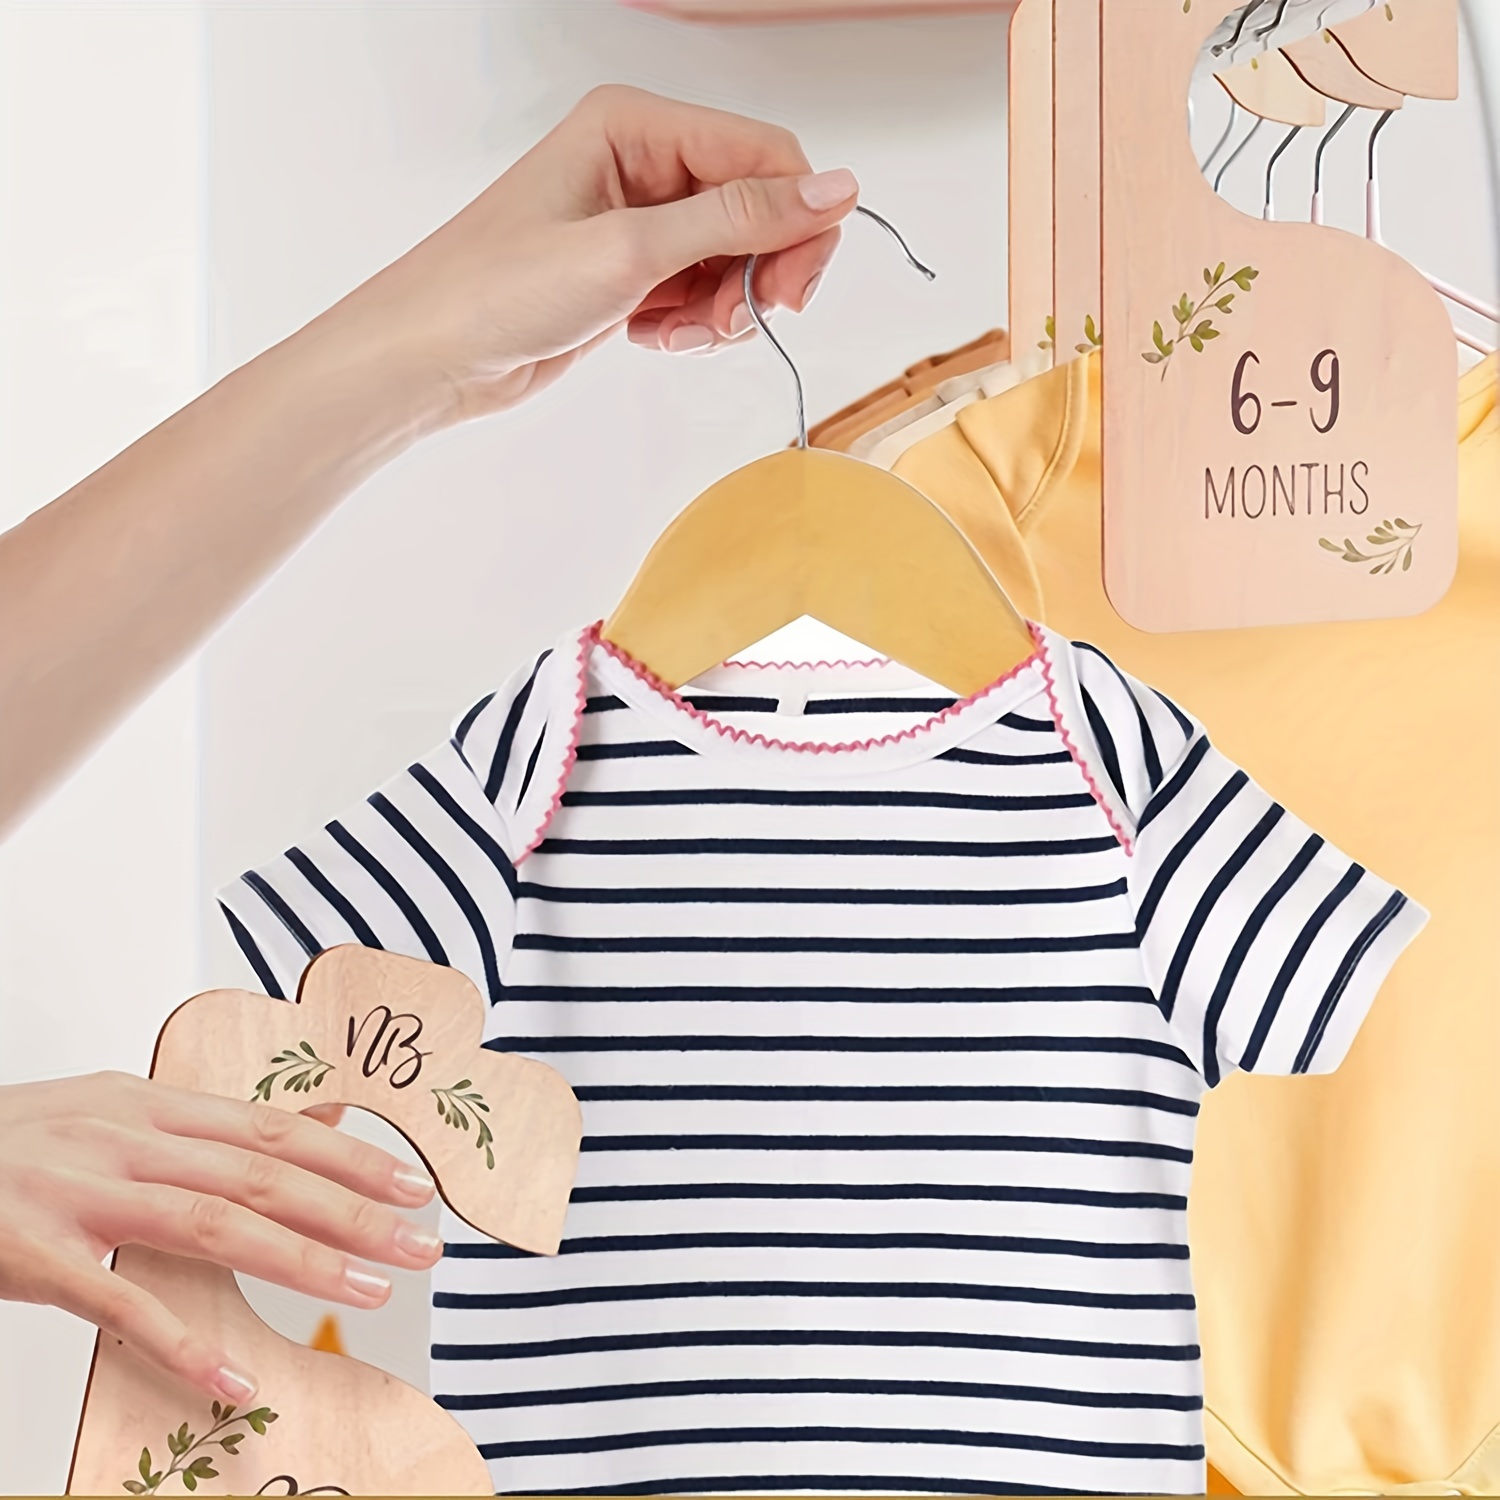 Baby Clothes Hangers- Wooden Baby Hangers For Nursery Adorable